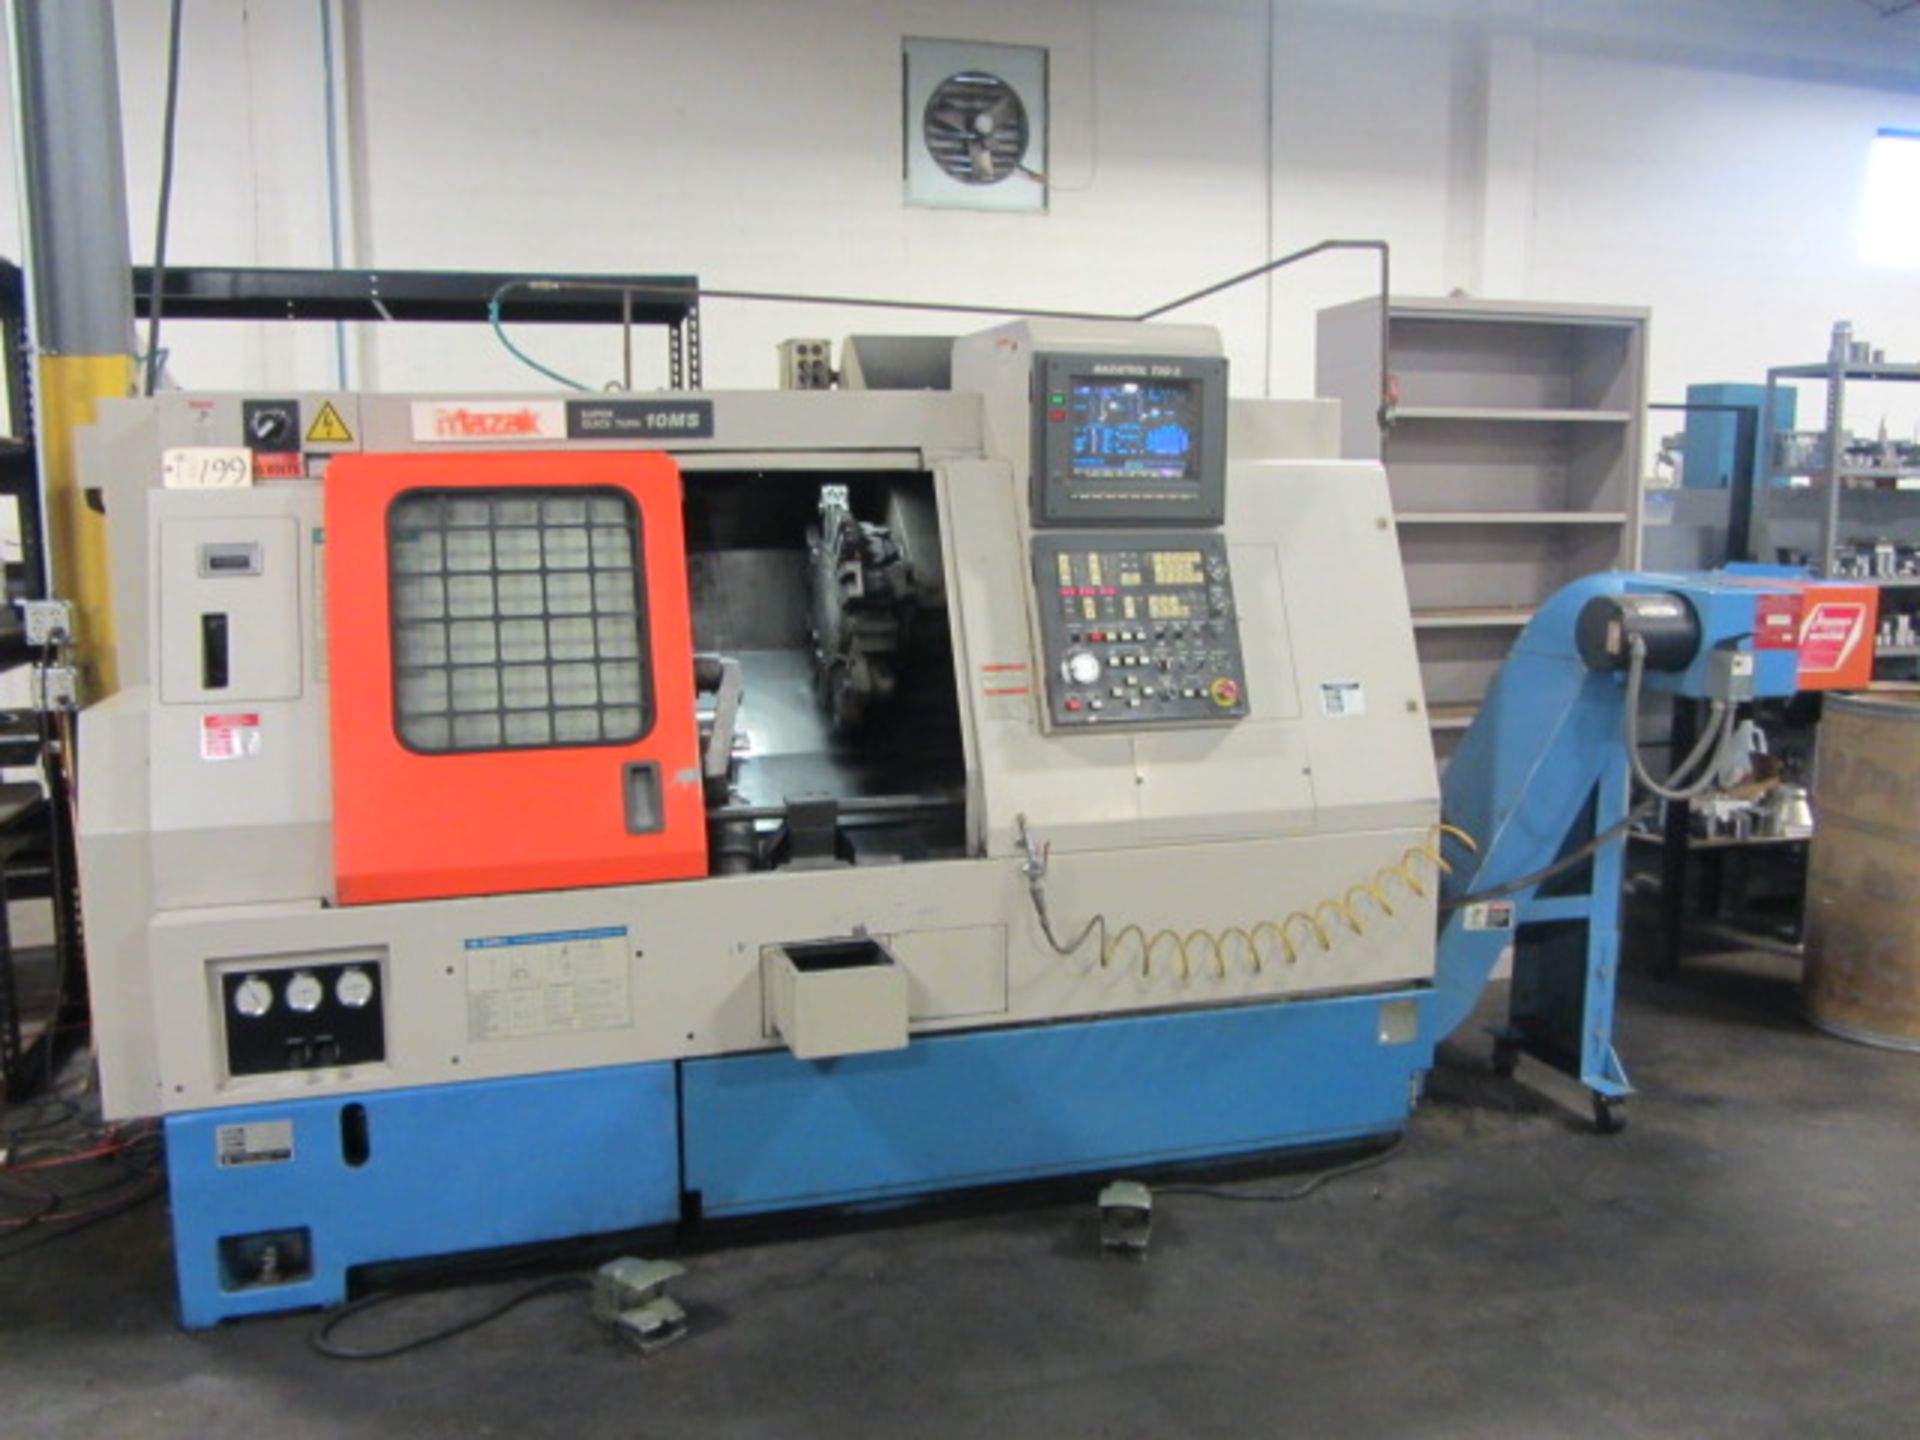 Mazak Super Quick Turn 10MS CNC Turning Center with Sub-Spindle, Milling, 6'' 3-Jaw Power Chuck,